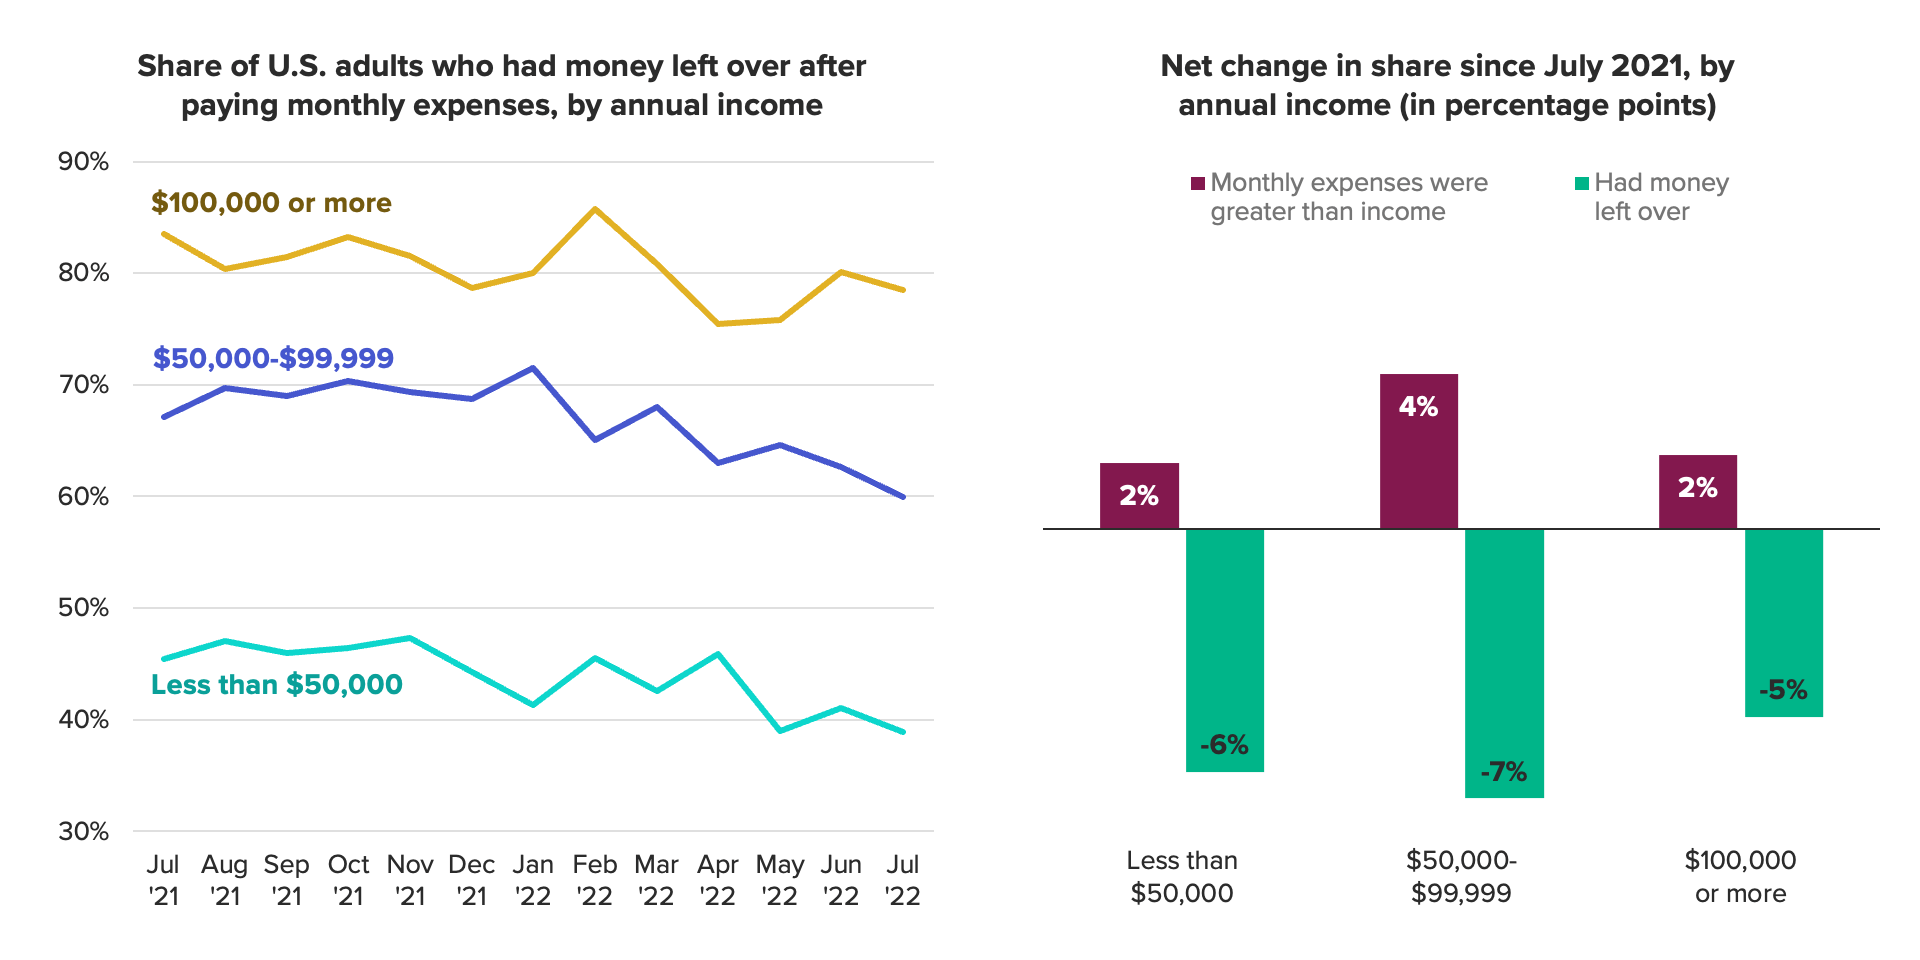 Combined line and bar chart of the share of adults who had money left over after monthly expenses showing the struggle to save.